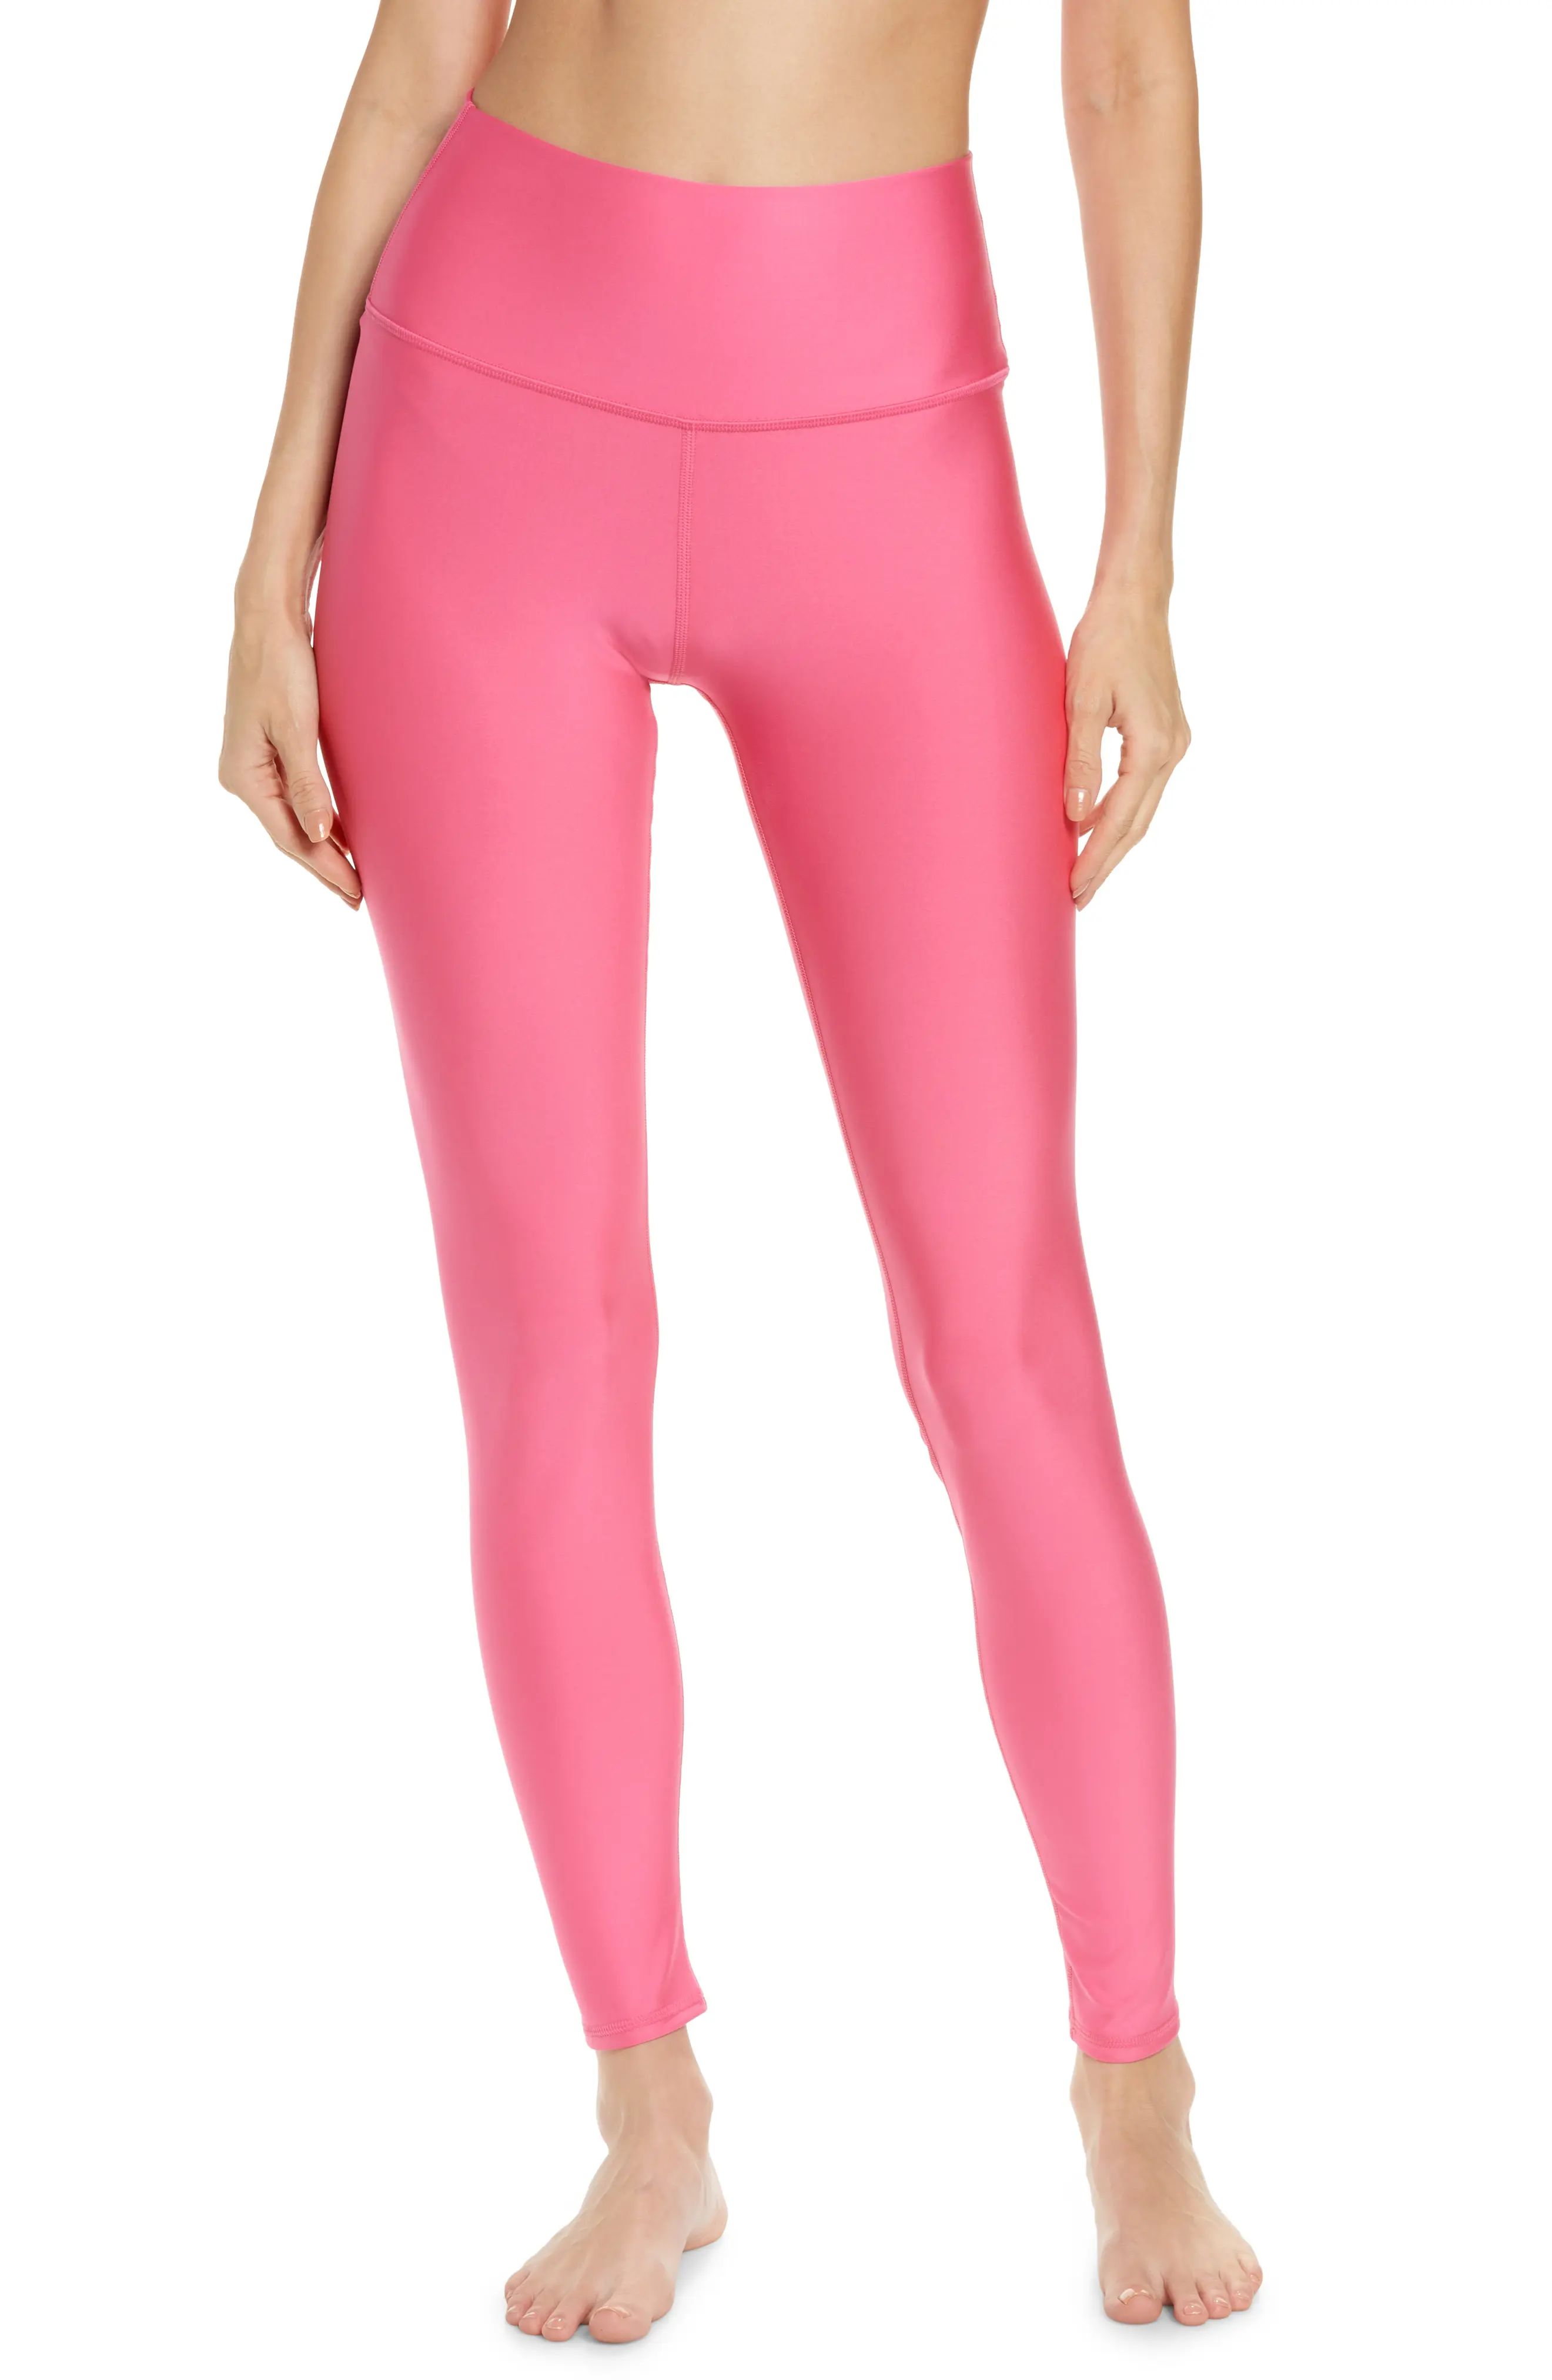 Alo Airlift High Waist Leggings in Pink Fuchsia at Nordstrom, Size Large | Nordstrom